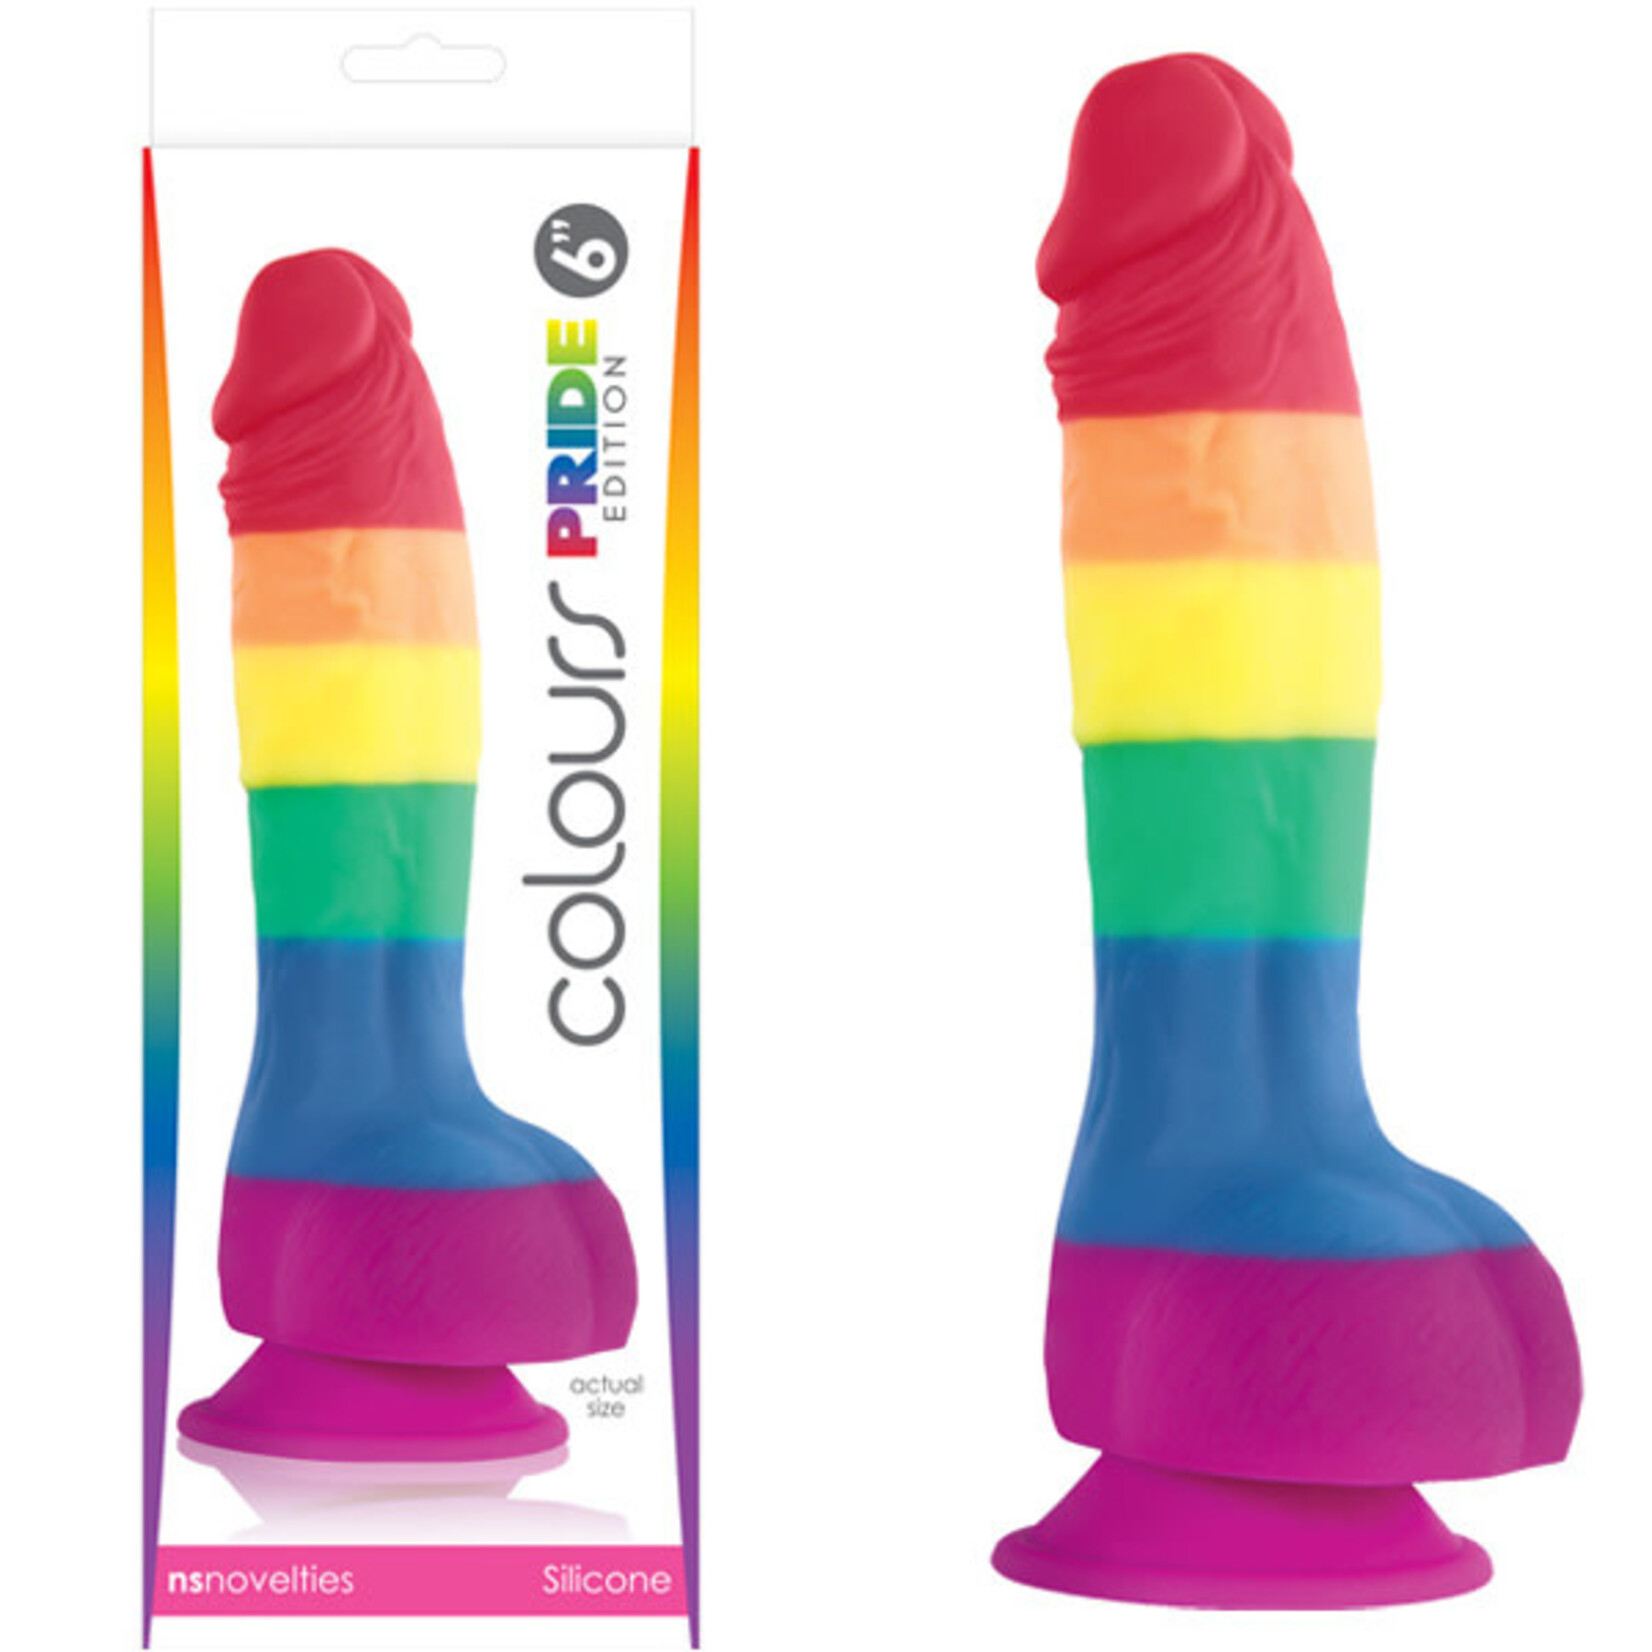 NS NOVELTIES COLOURS PRIDE EDITION 6 INCH SILICONE DILDO IN RAINBOW